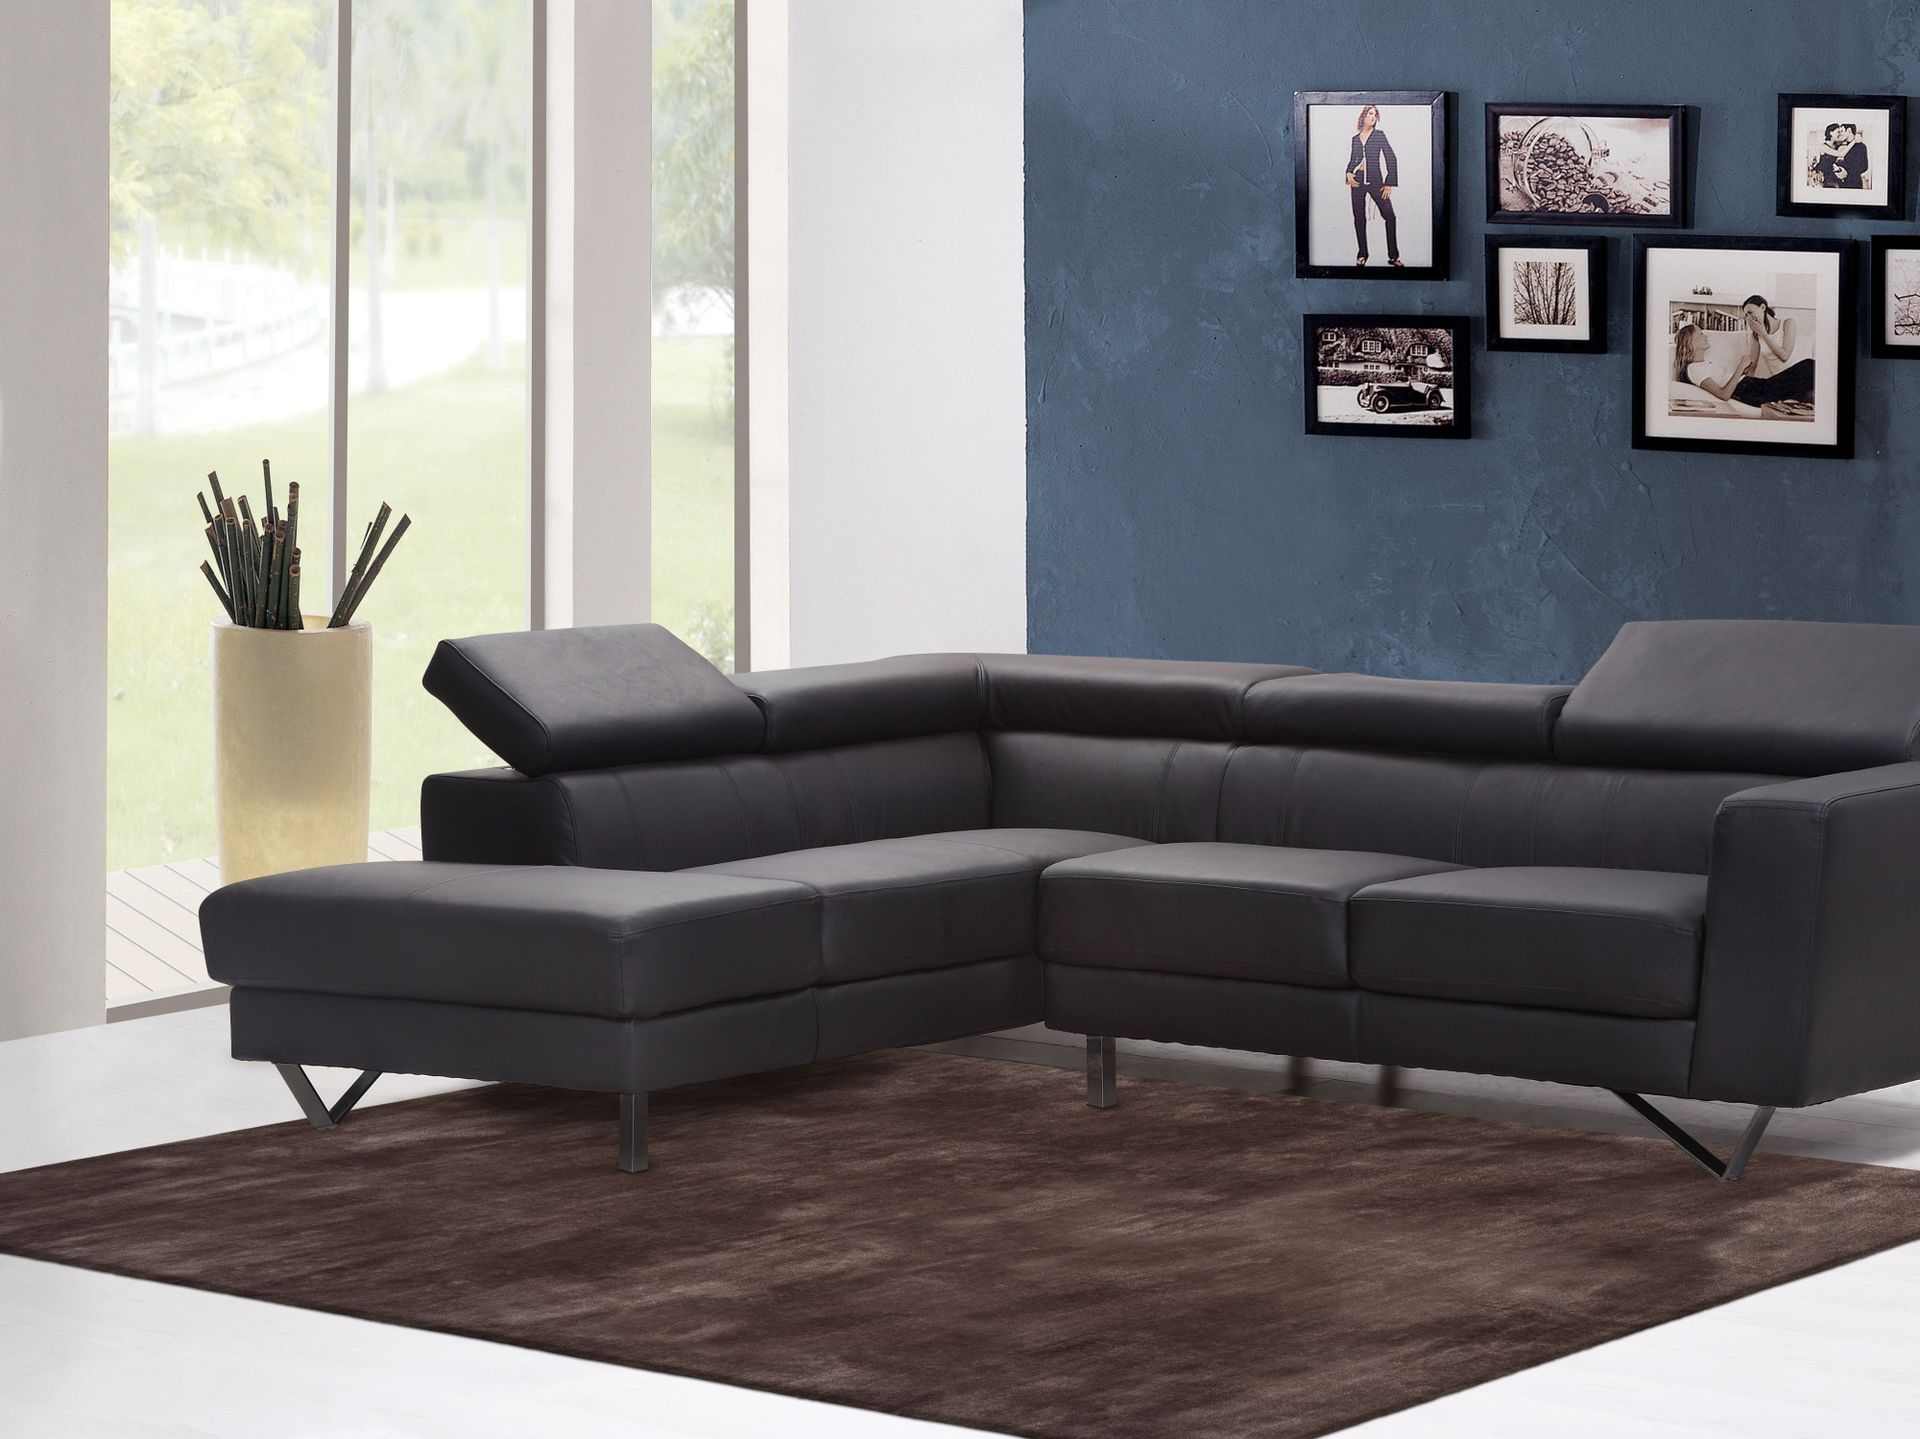 Photo of a red-brown viscose carpet in front of a black leather couch.